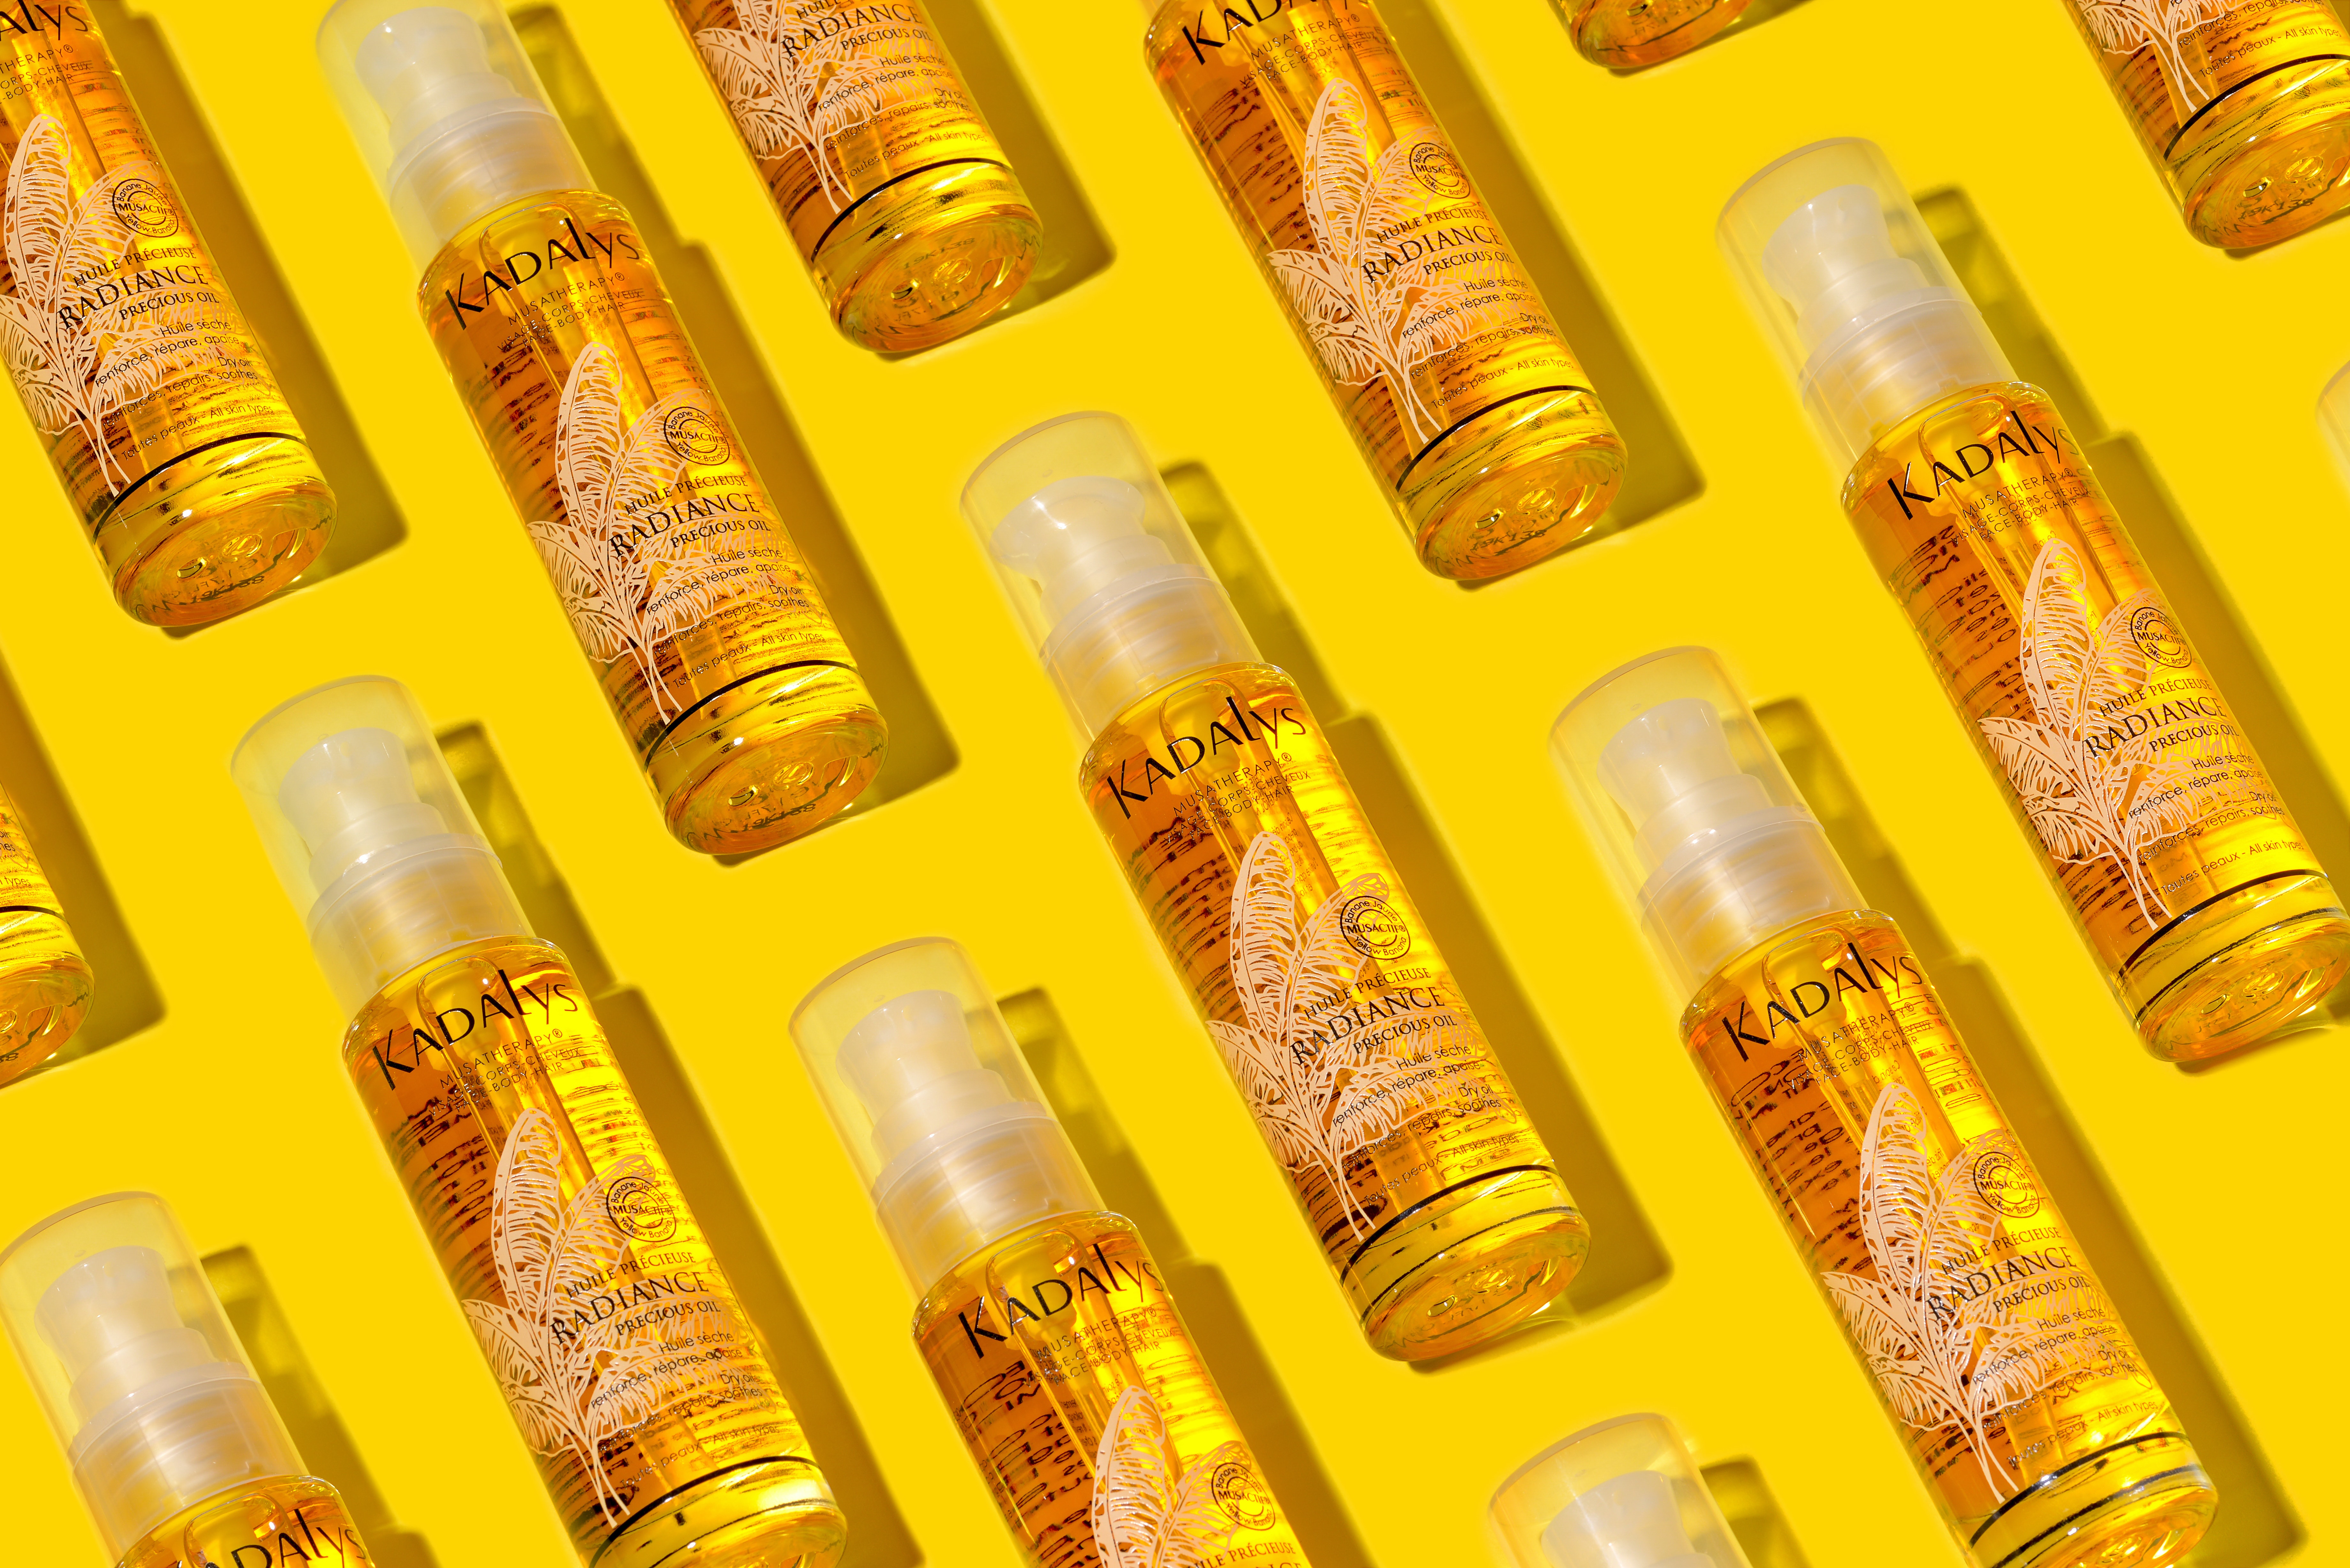 The Radiance Precious Oil, which Kadalys launched in the U.S. on Oct. 13.